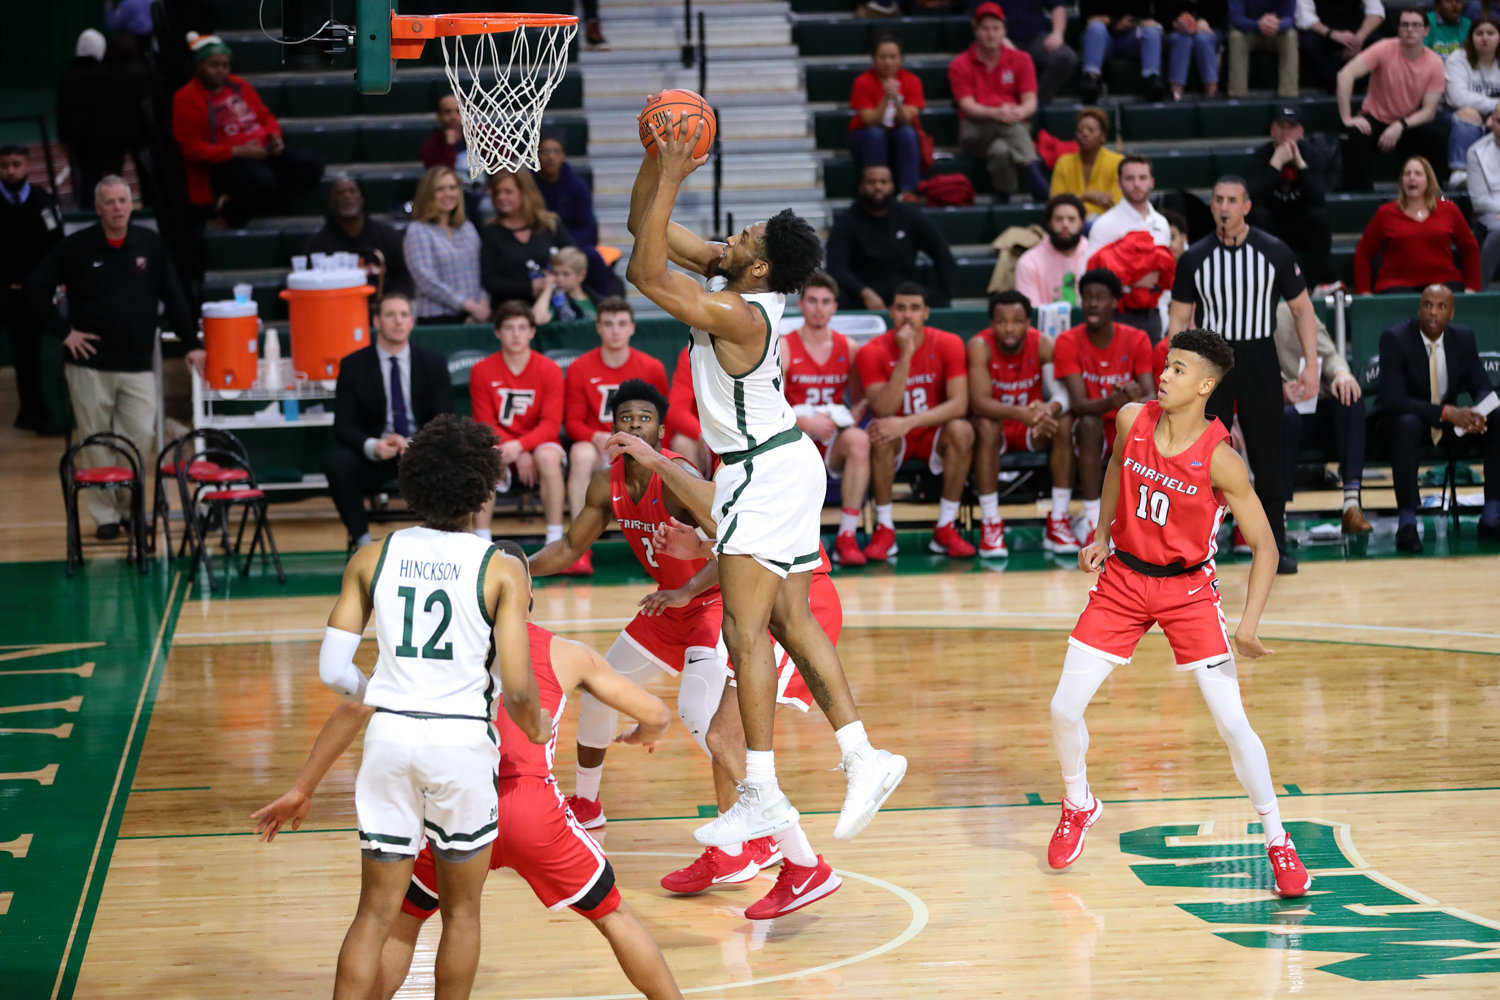 Manhattan’s Pauly Paulicap scored 11 points and pulled down nine rebounds, but it wasn’t enough to prevent the Jaspers from suffering a 66-50 loss to Fairfield last Friday night.